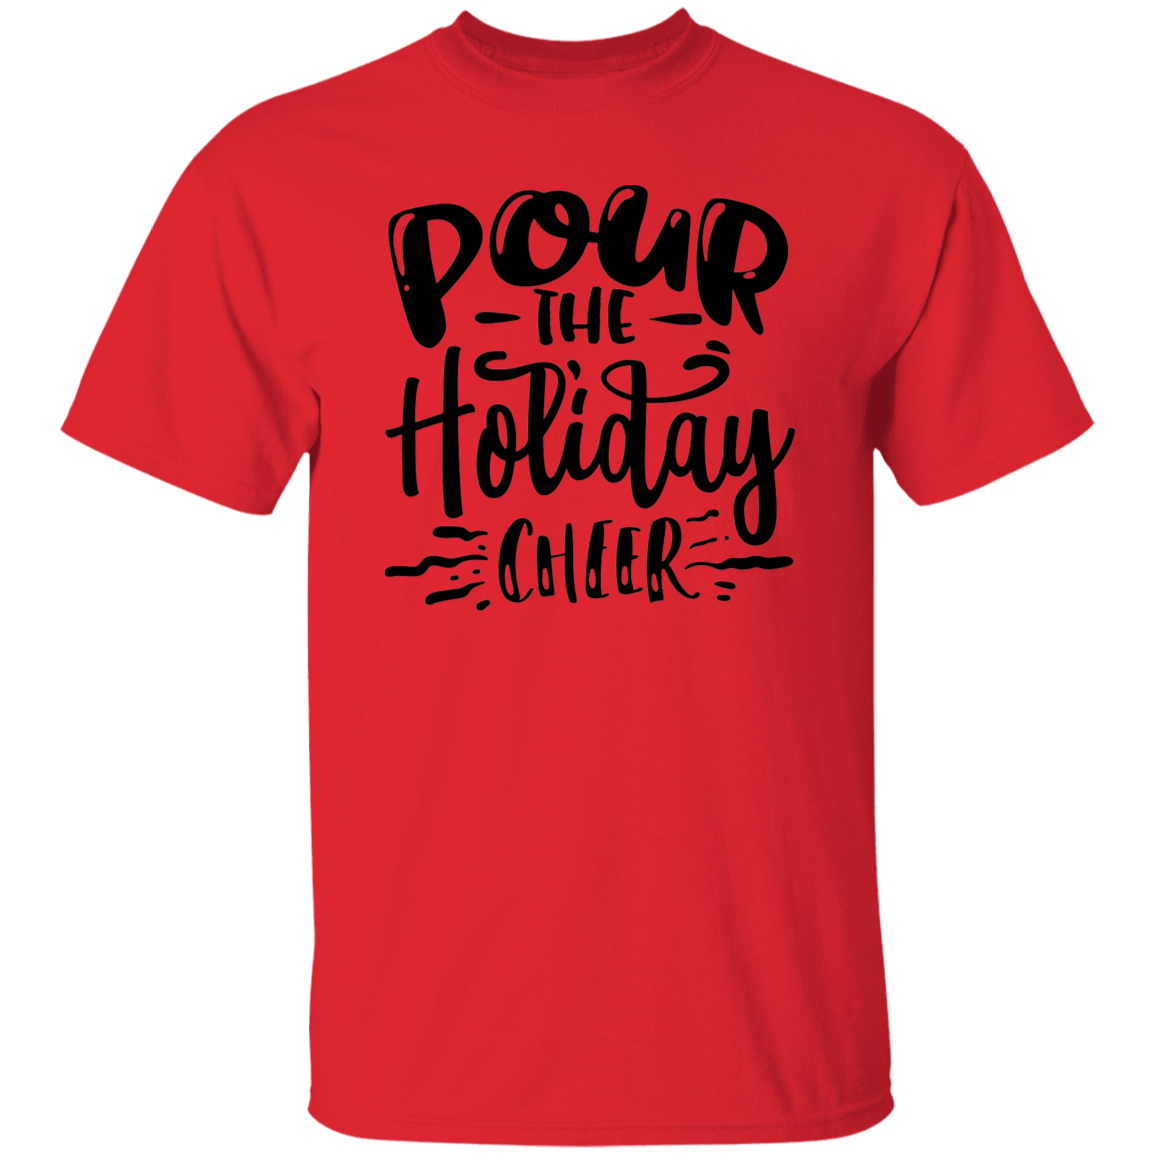 Pour The Holiday Cheer G500 5.3 oz. T-Shirt